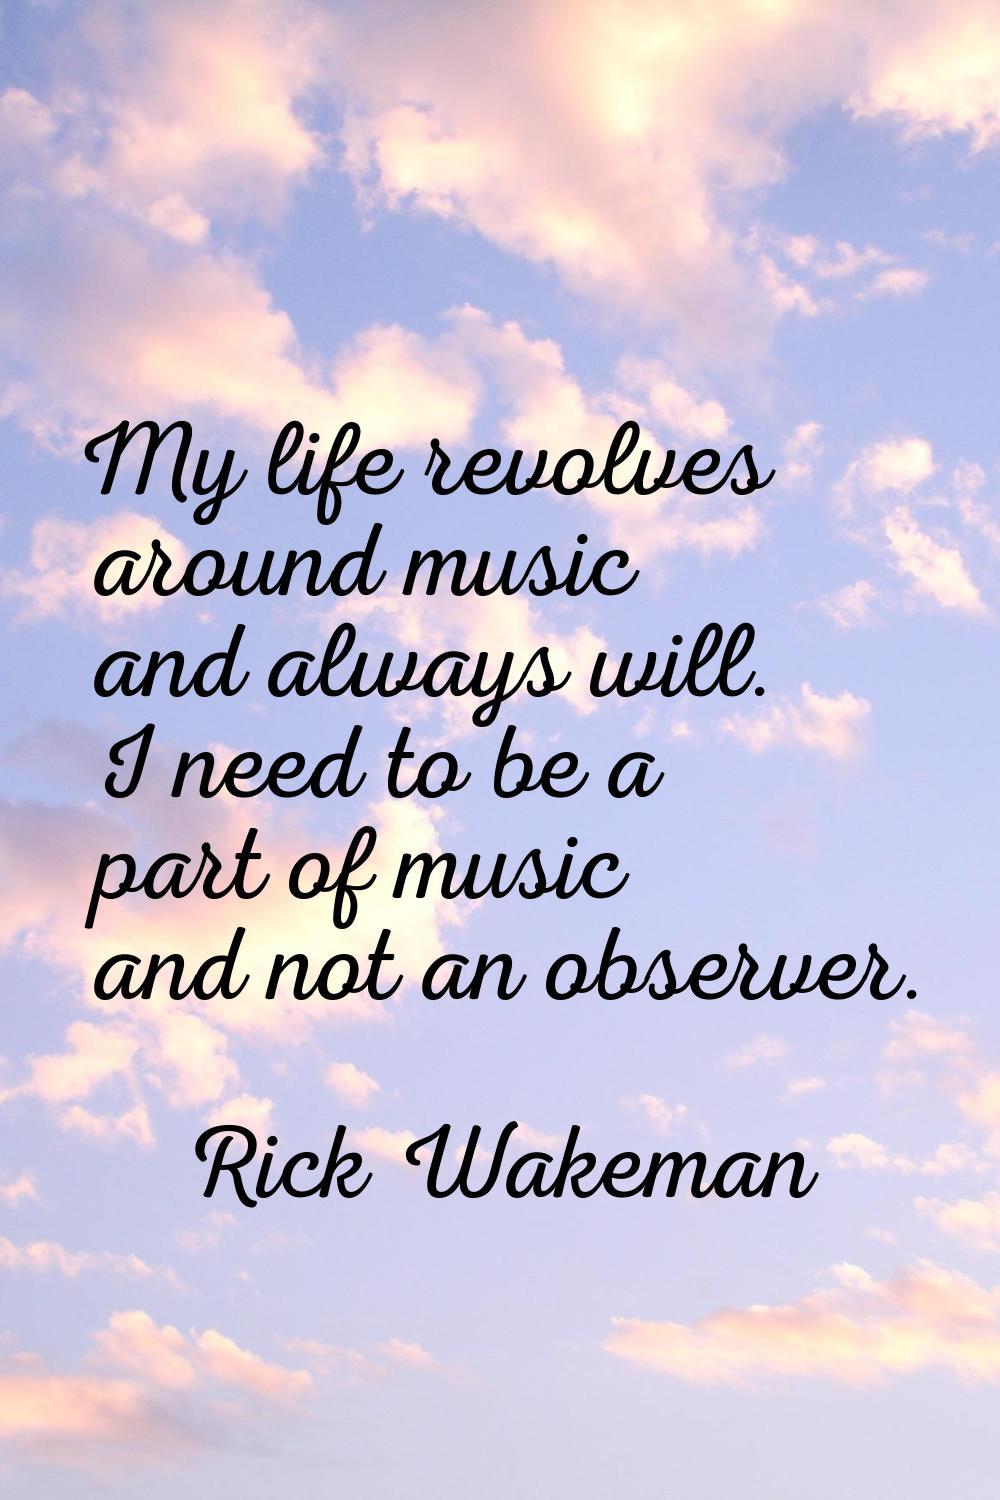 My life revolves around music and always will. I need to be a part of music and not an observer.